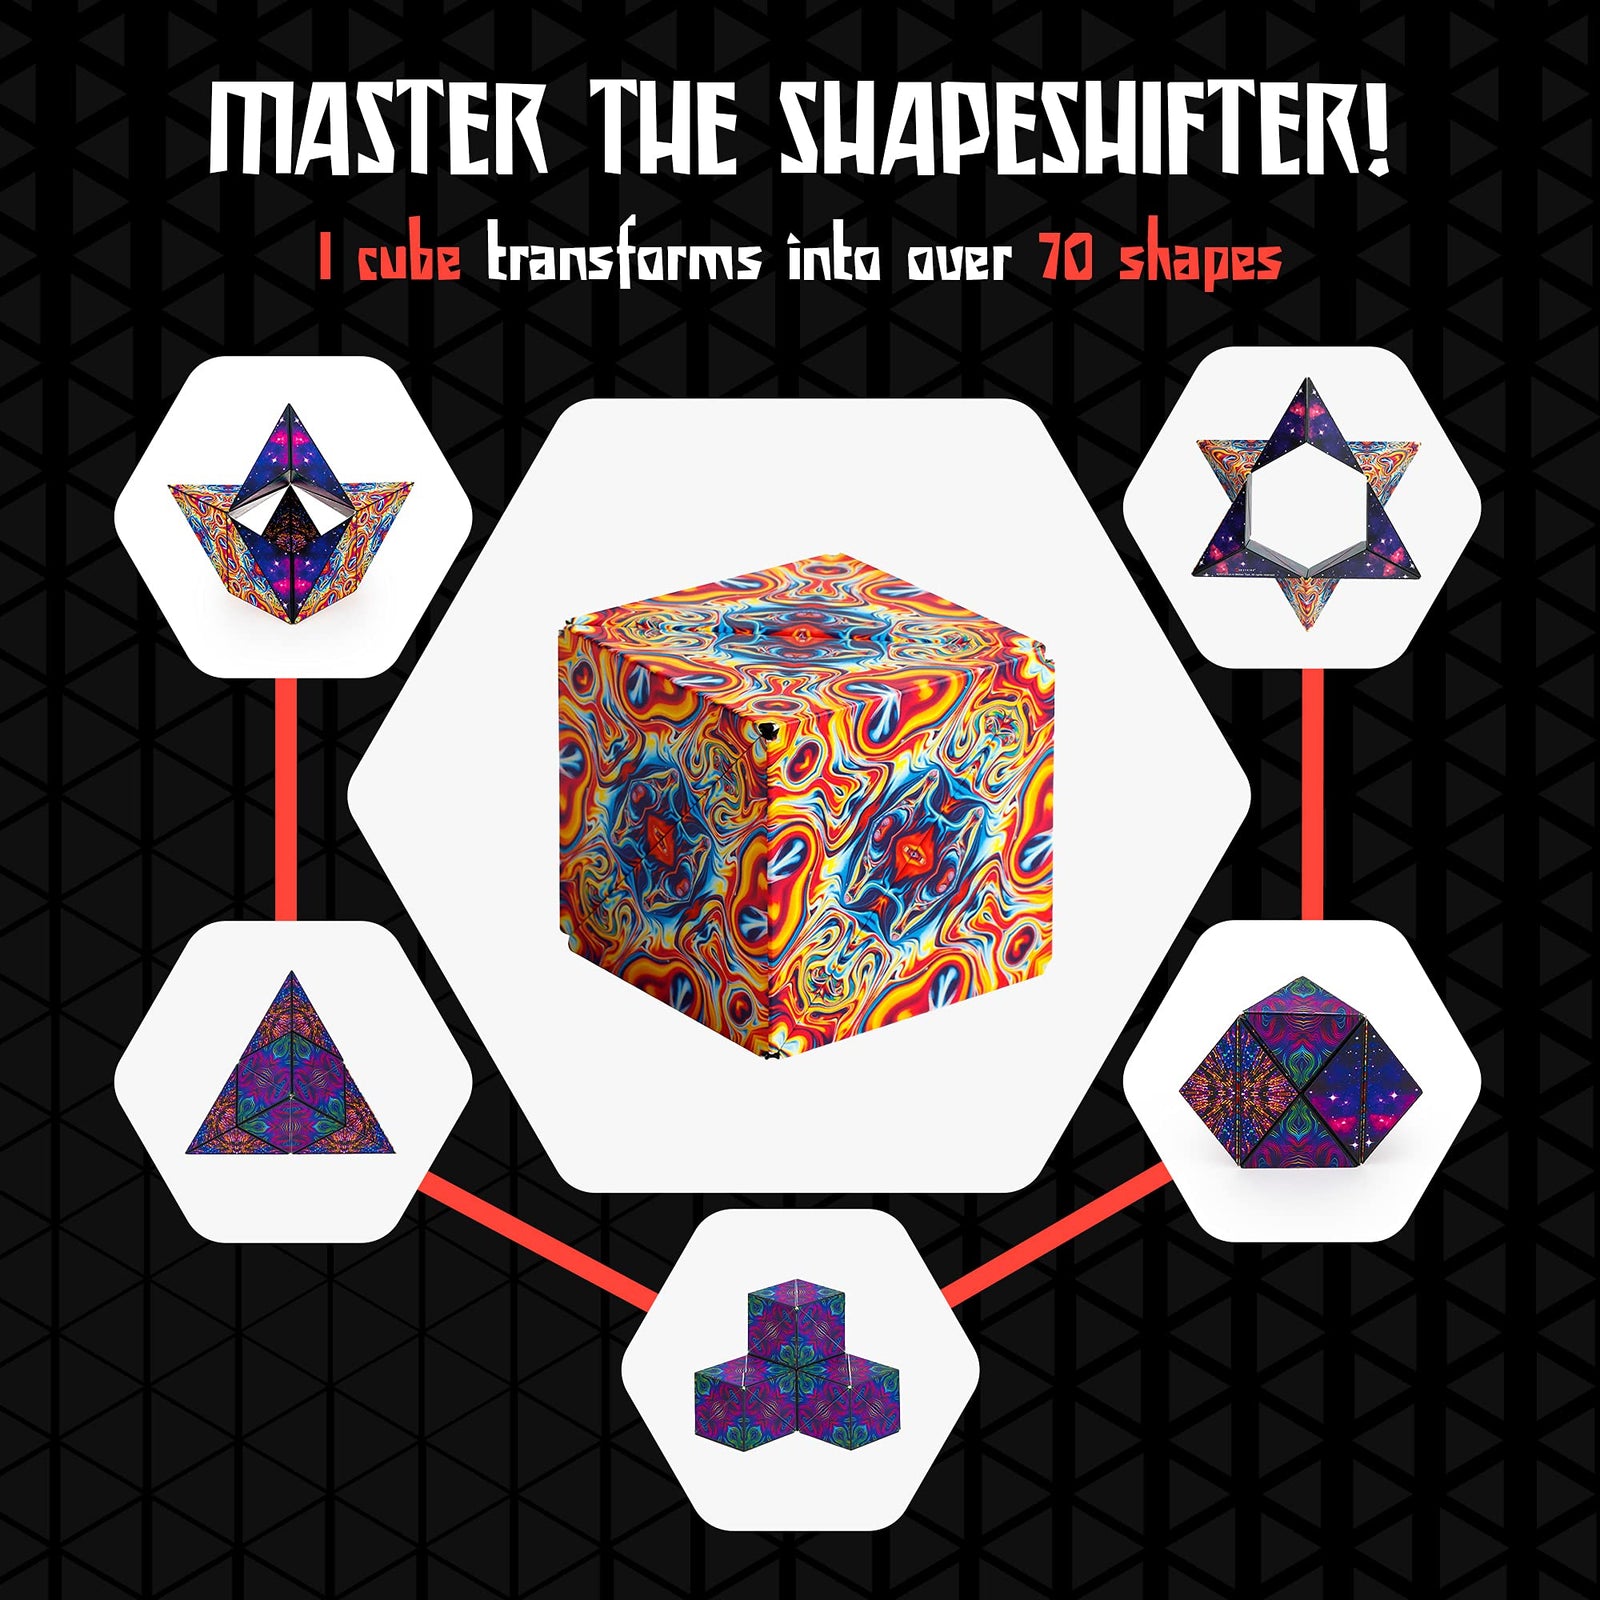 SHASHIBO Shape Shifting Box - Award-Winning, Patented Fidget Cube w/ 36 Rare Earth Magnets - Extraordinary 3D Magic Cube – Shashibo Cube Magnet Fidget Toy Transforms Into Over 70 Shapes (Spaced Out)